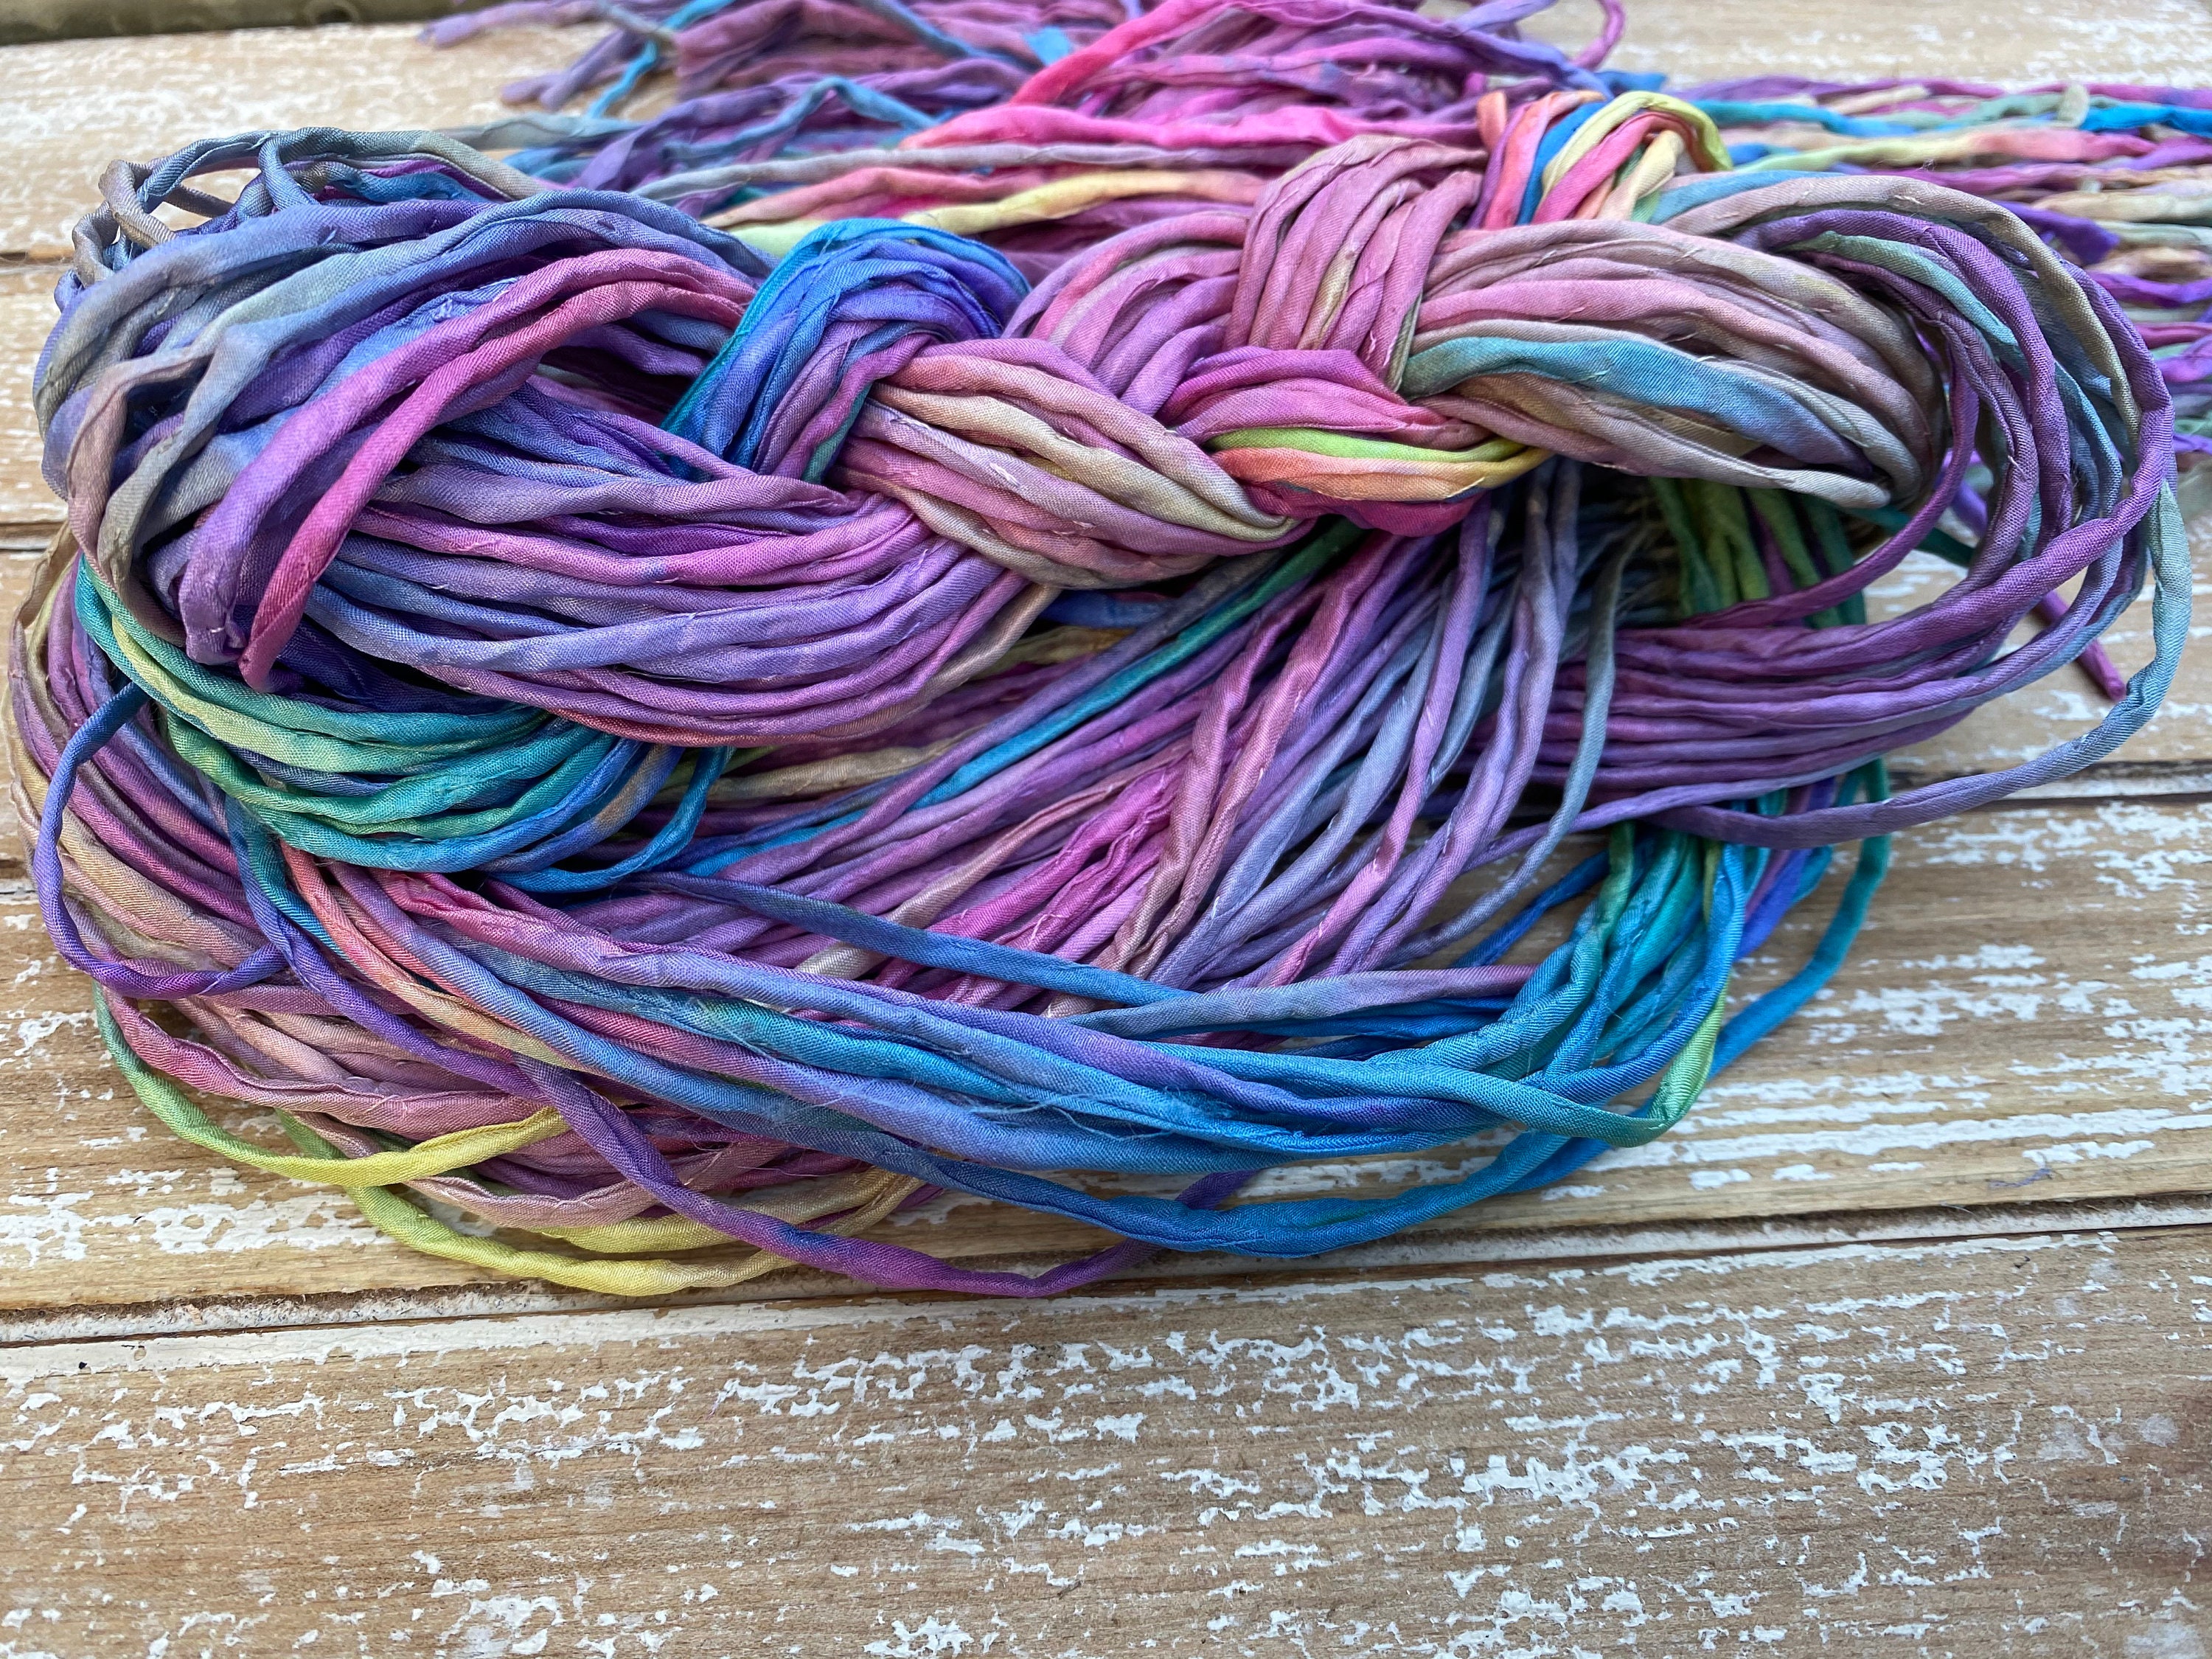 Tropical Petals Silk Cord Assortment 2-3mm Hand Dyed Hand Sewn Cording Bulk  10 to 50 Strings, Eye Candy plus a dye lot with more Pinks